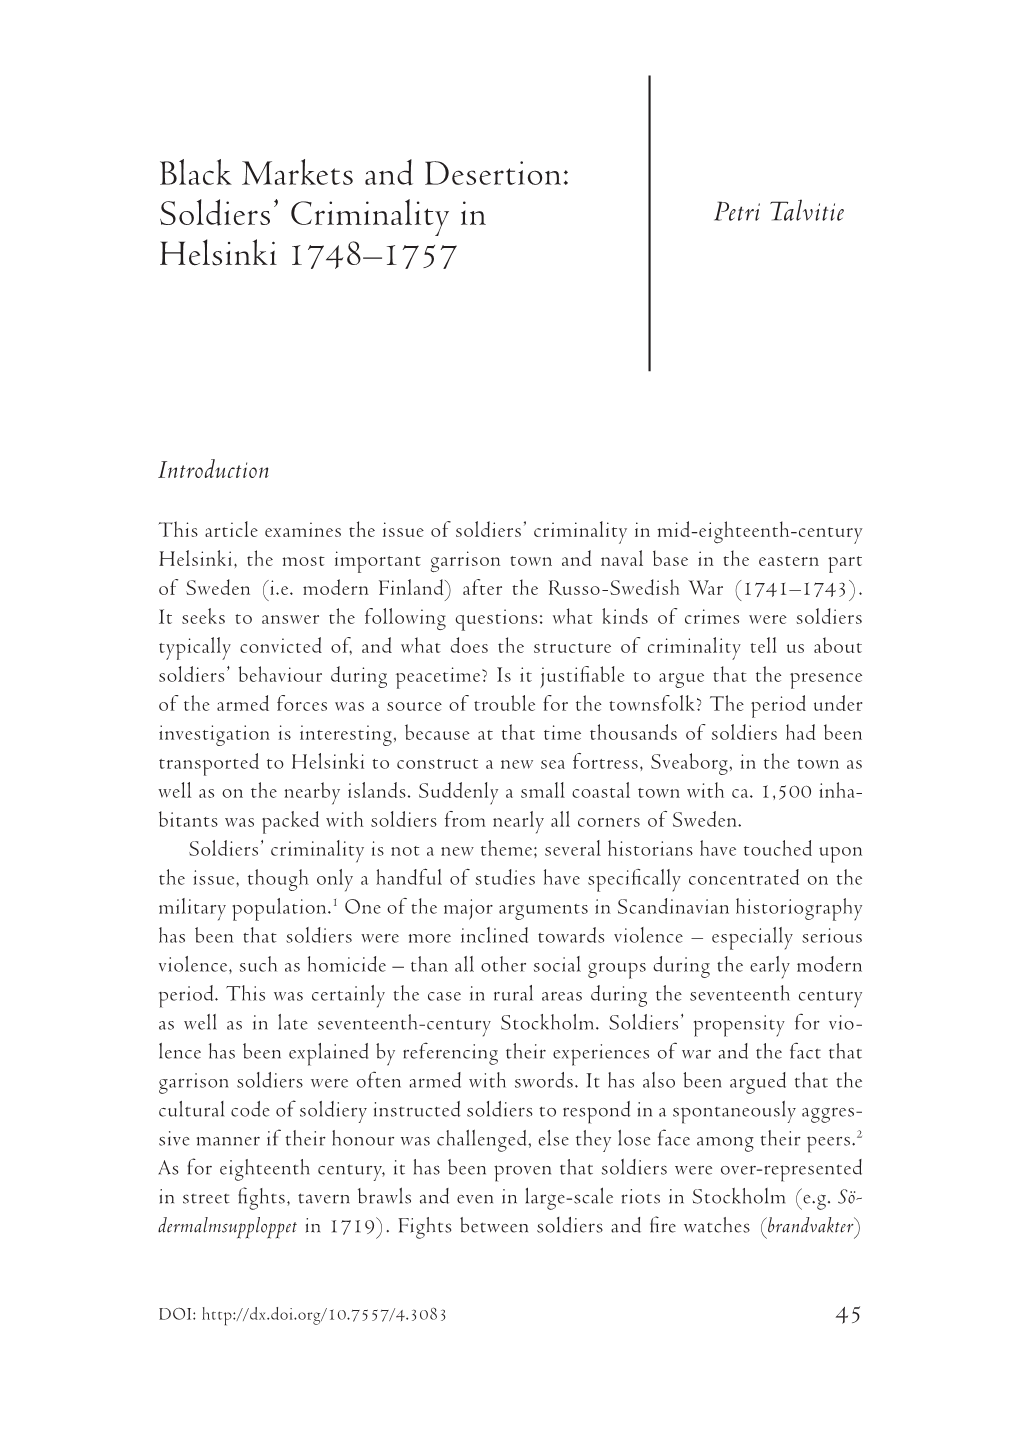 Black Markets and Desertion: Soldiers' Criminality in Helsinki 1748–1757